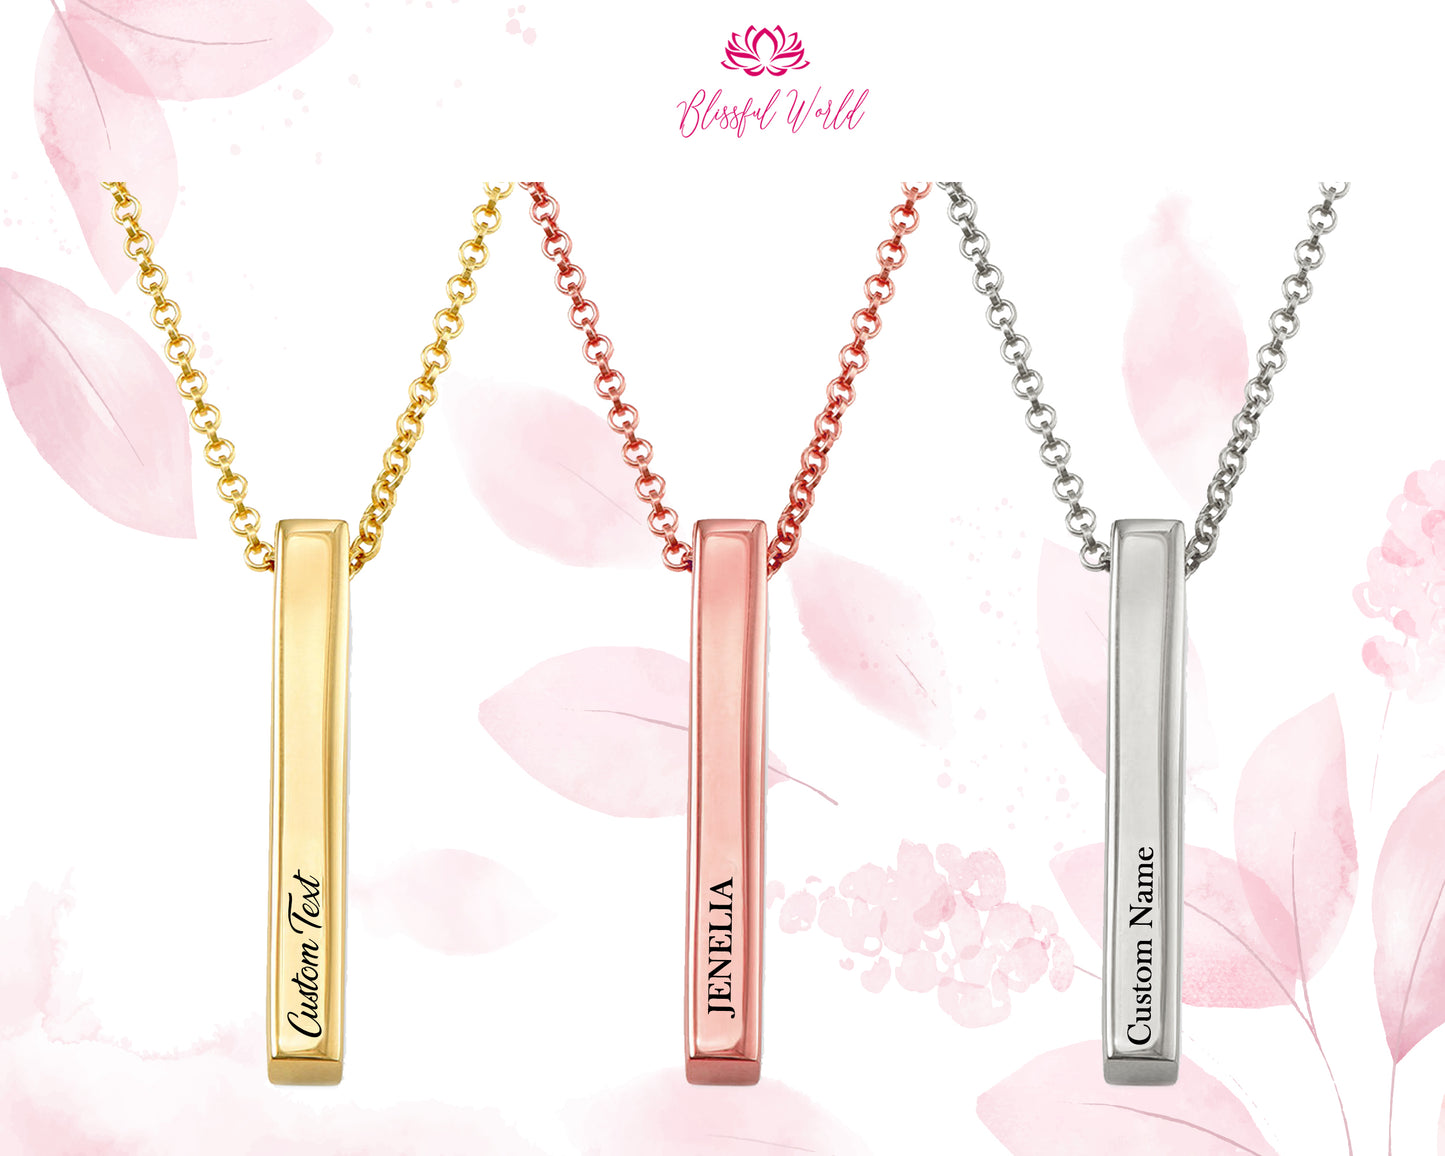 Personalized Engraving,Customize Name Bar Necklace Square 3D Bar Custom Name Necklace Stainless Steel Pendant Women/Men Wedding Gifts